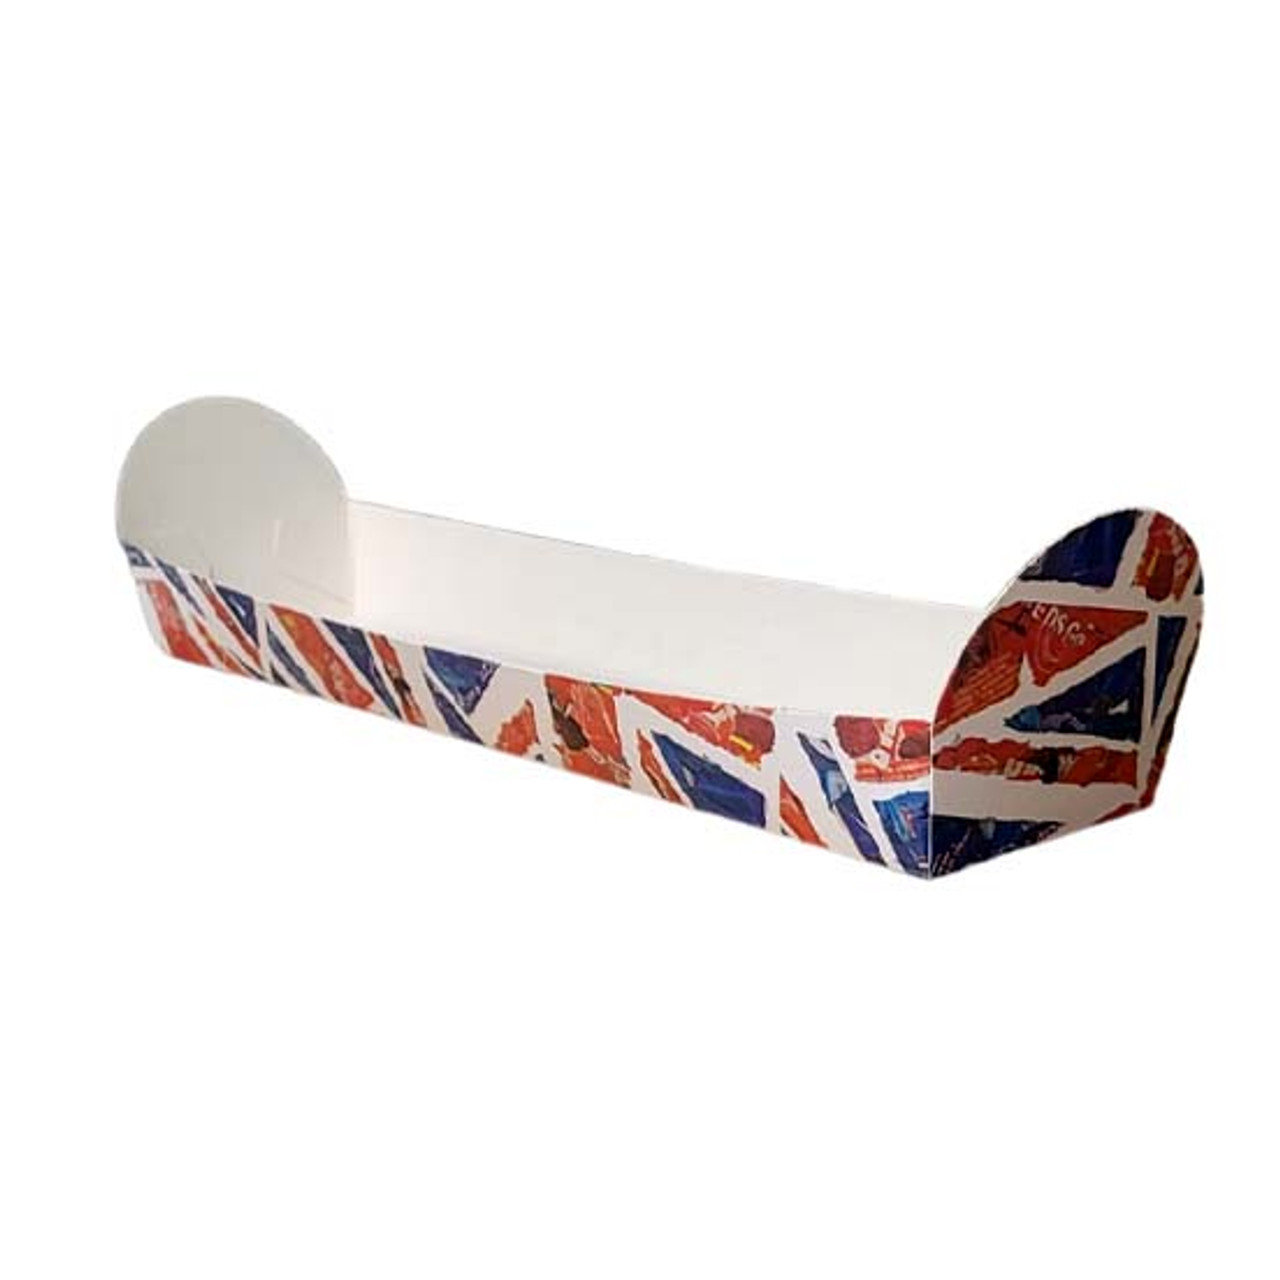 Case of 500 Union Jack design Waxed Lined Cardboard Baguette trays 270 x 100 x 30mm 